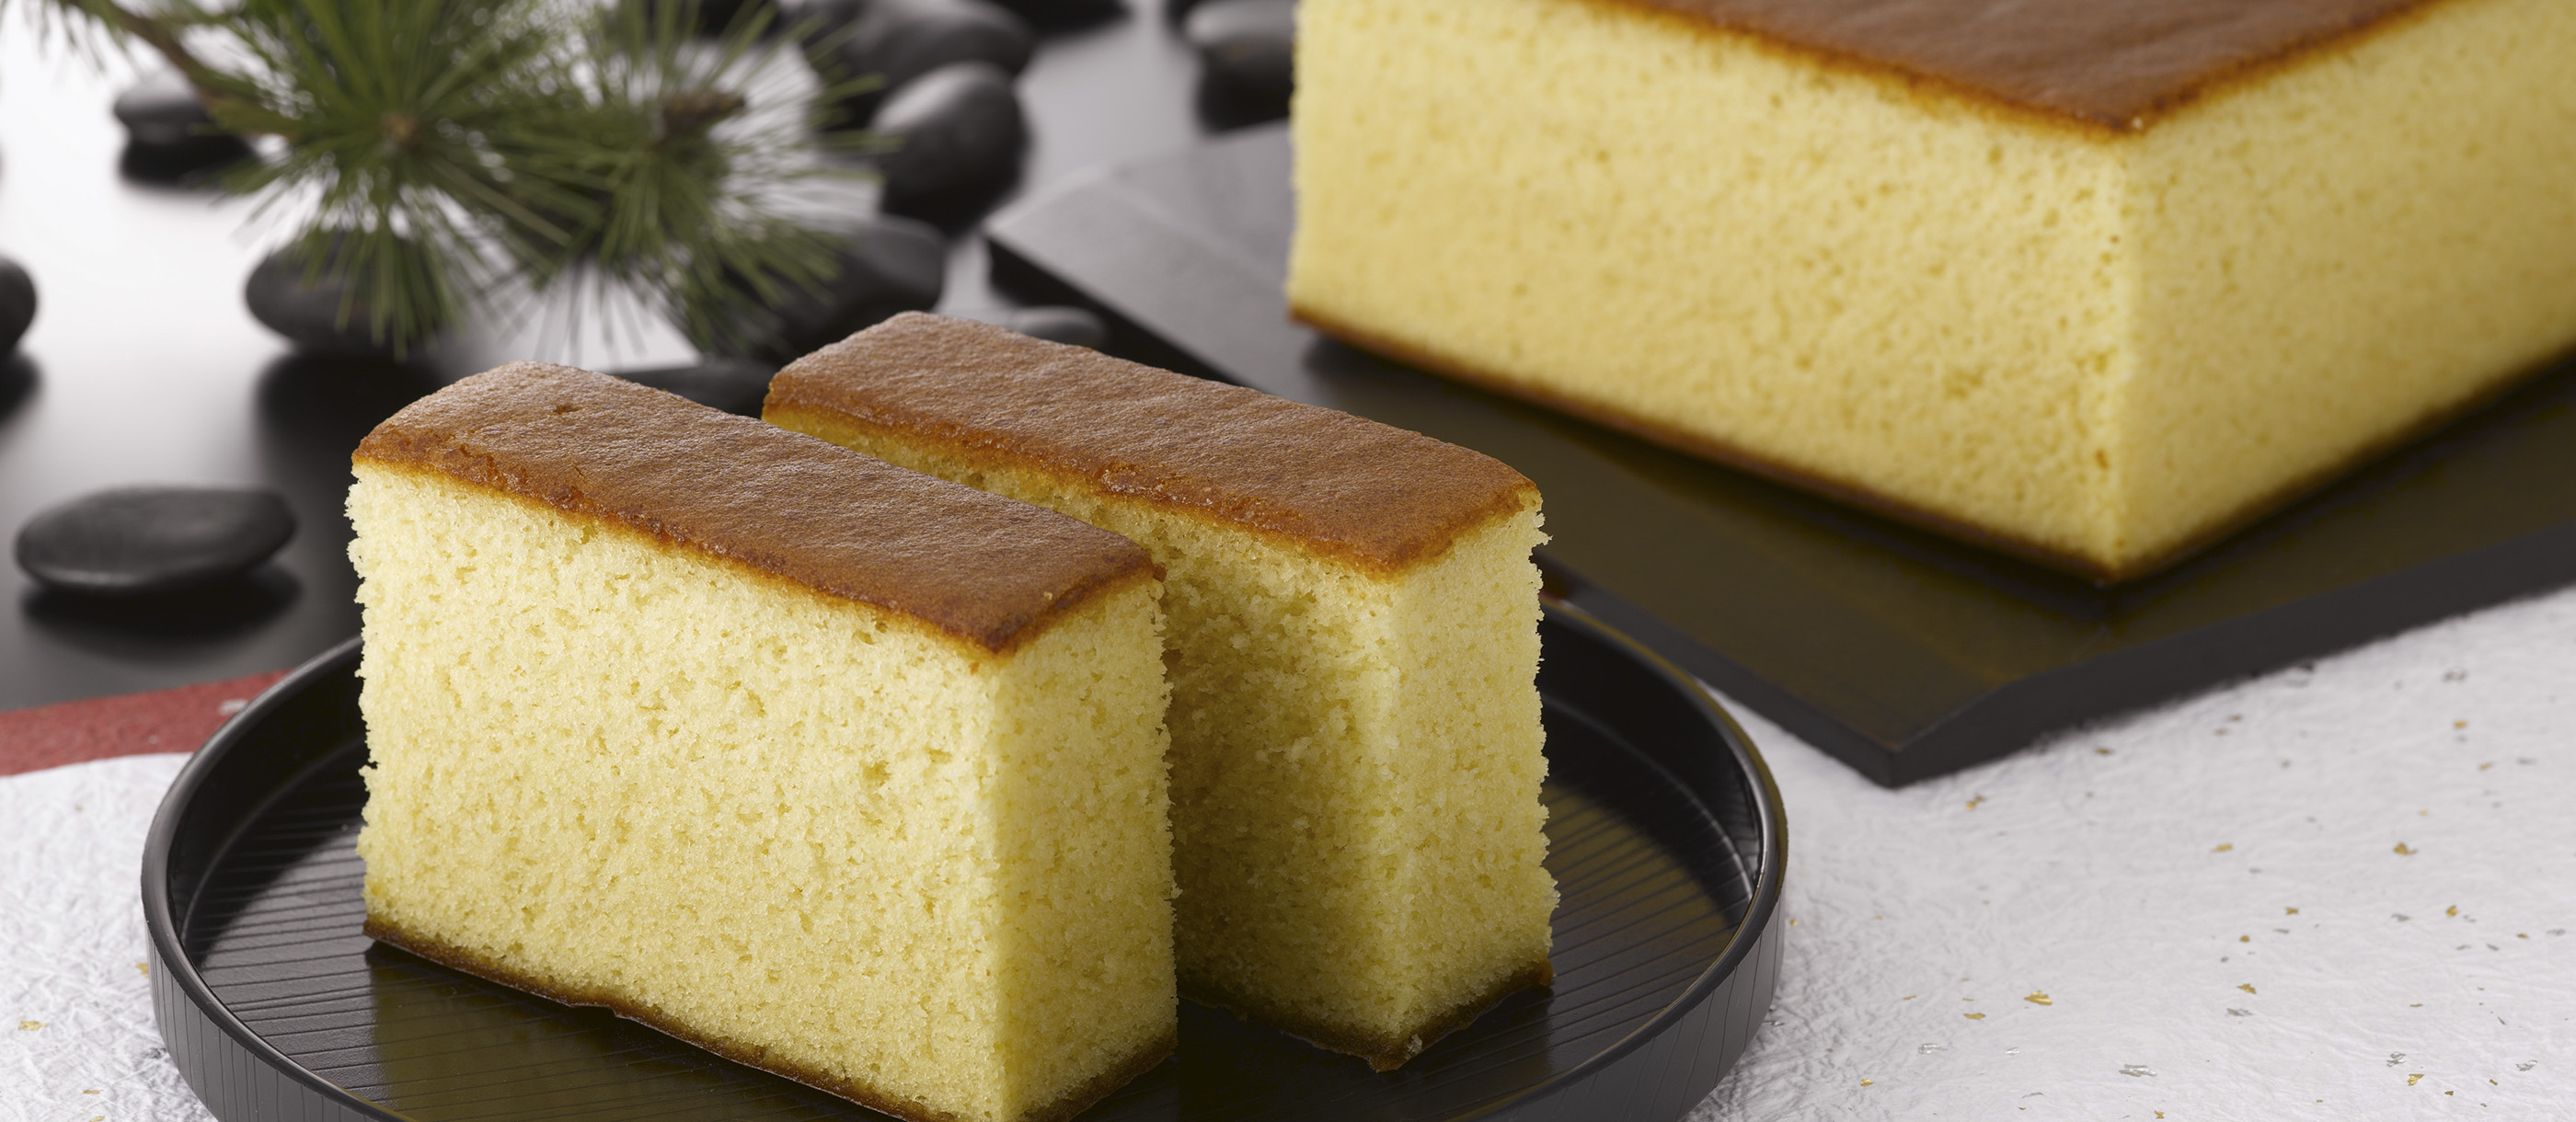 Japanese Pastry Course #7 Castella Cake Course | Udemy